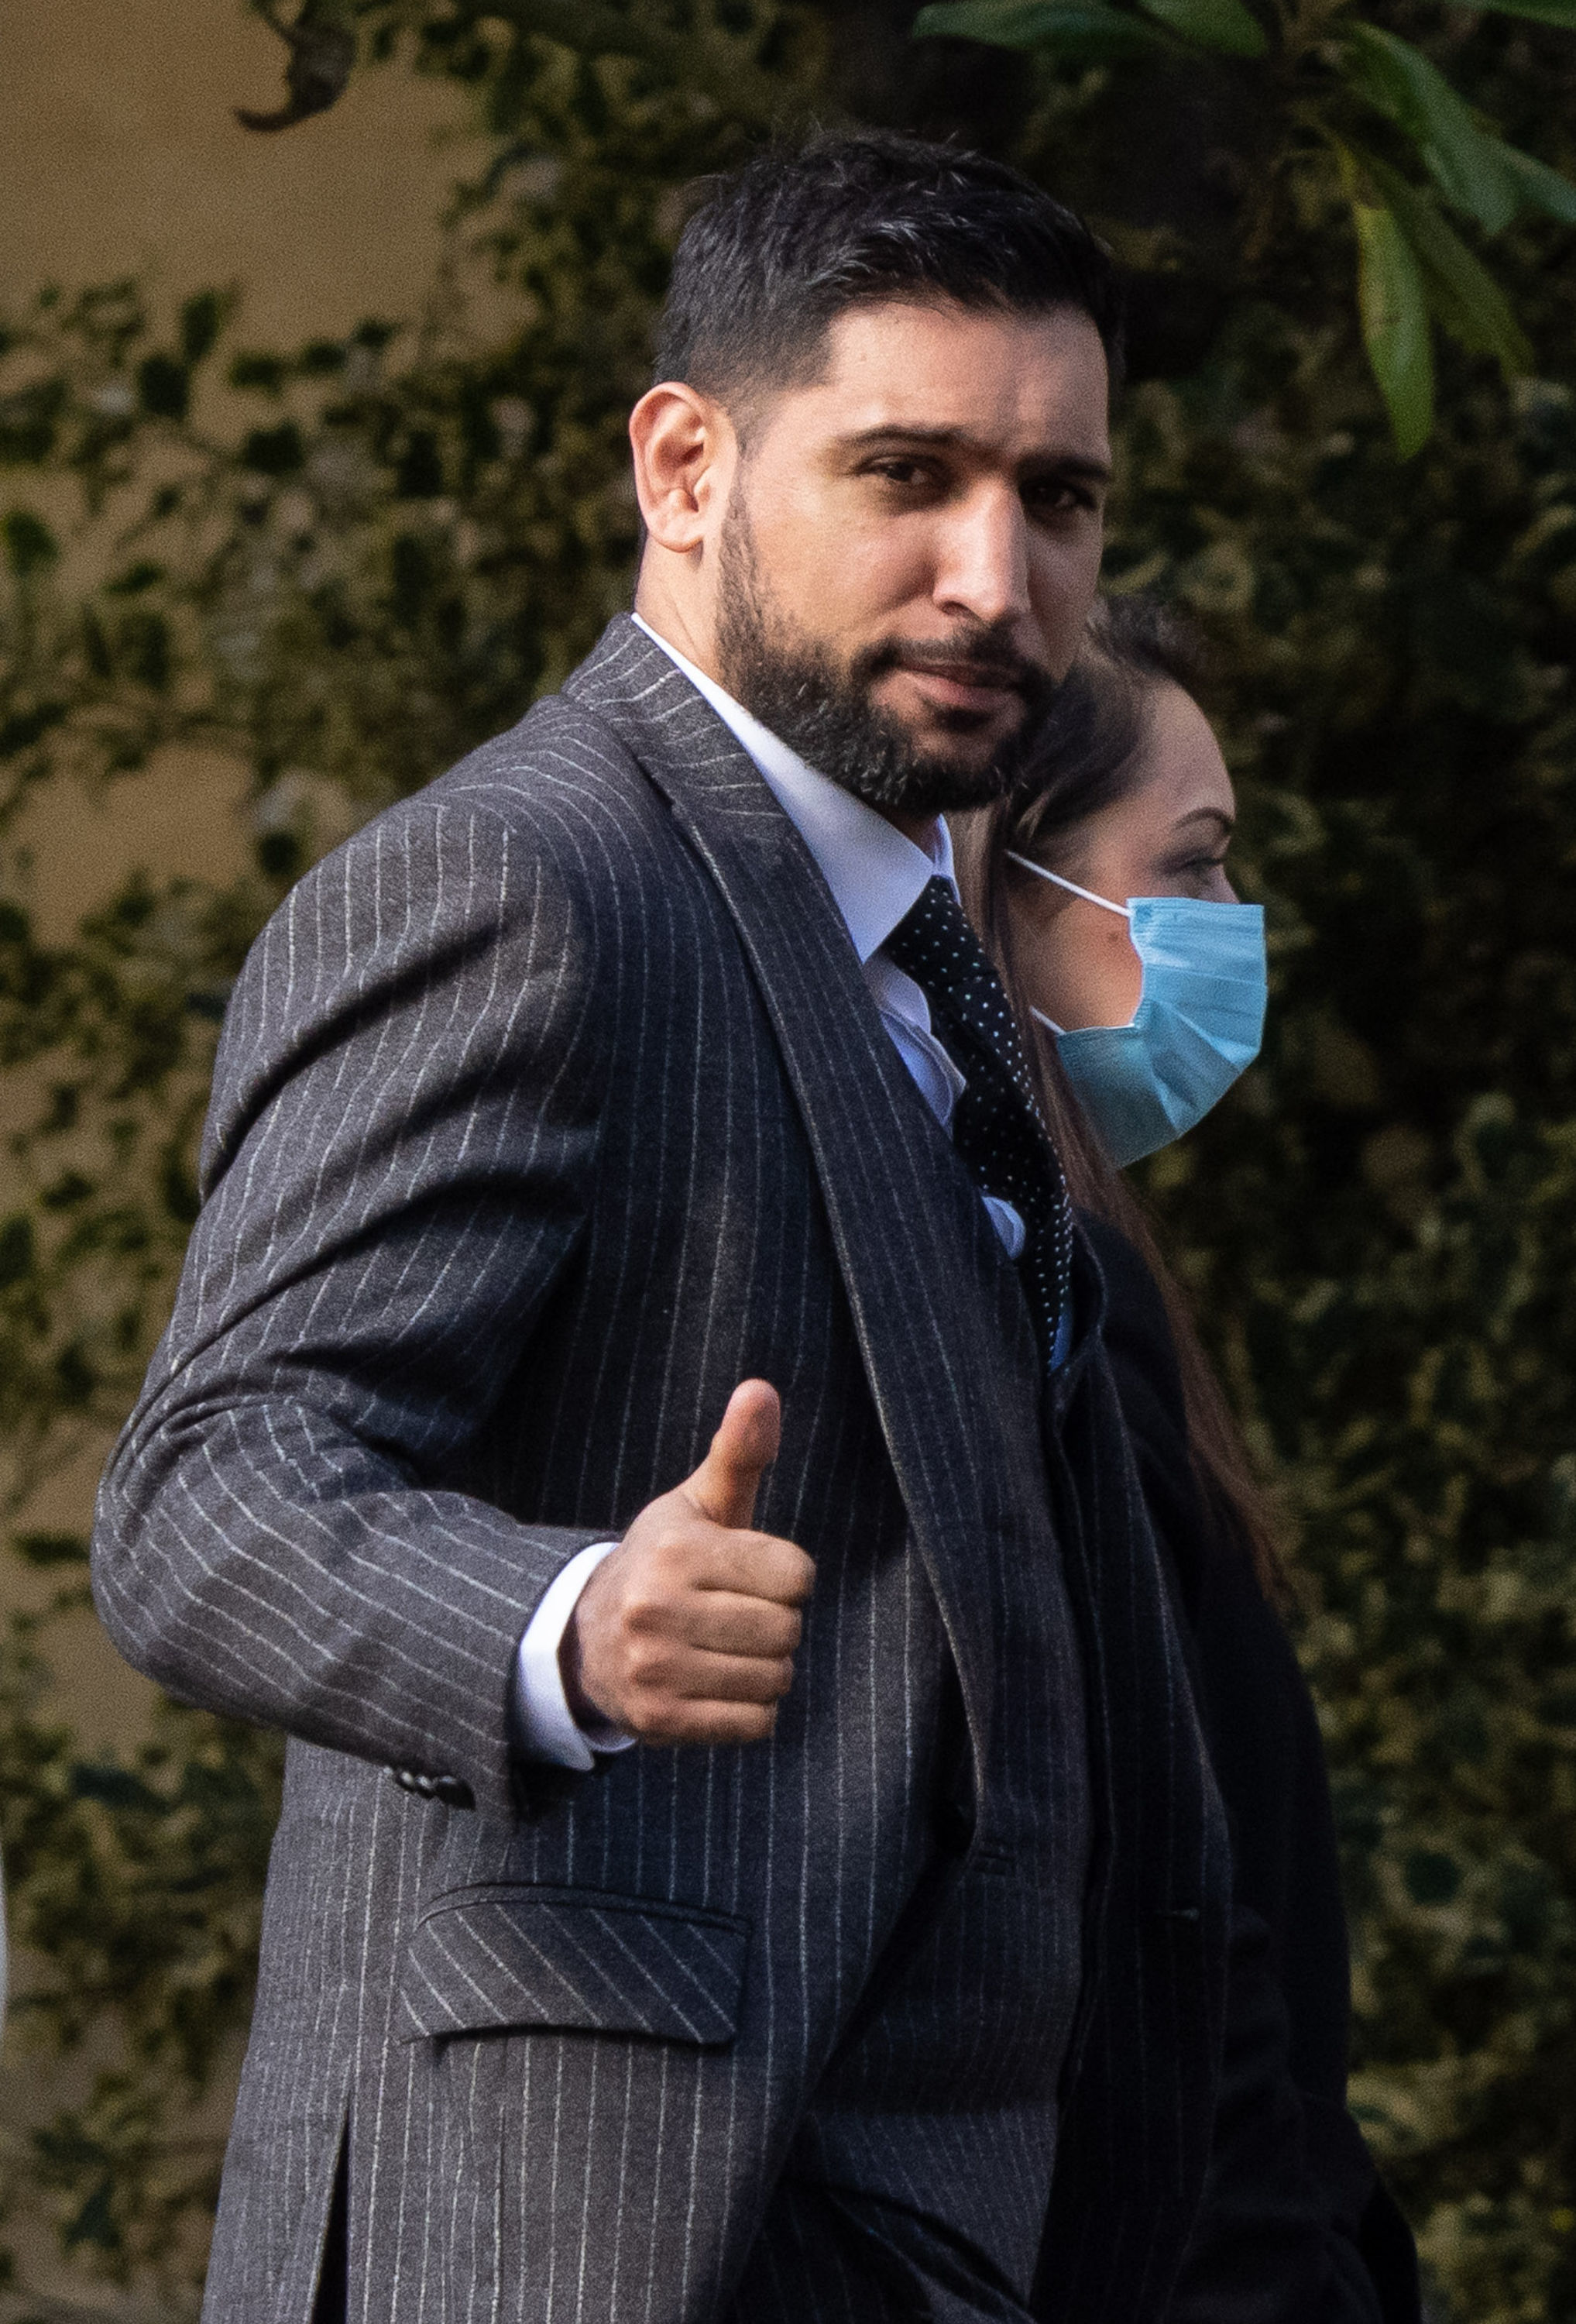 Former world boxing champion Amir Khan, gives a thumbs up as he arrives at Snaresbrook Crown Court, in east London, where three men are accused of robbing the boxer of a diamond watch at gunpoint. Khans 72,000 custom-made Franck Muller watch was stolen